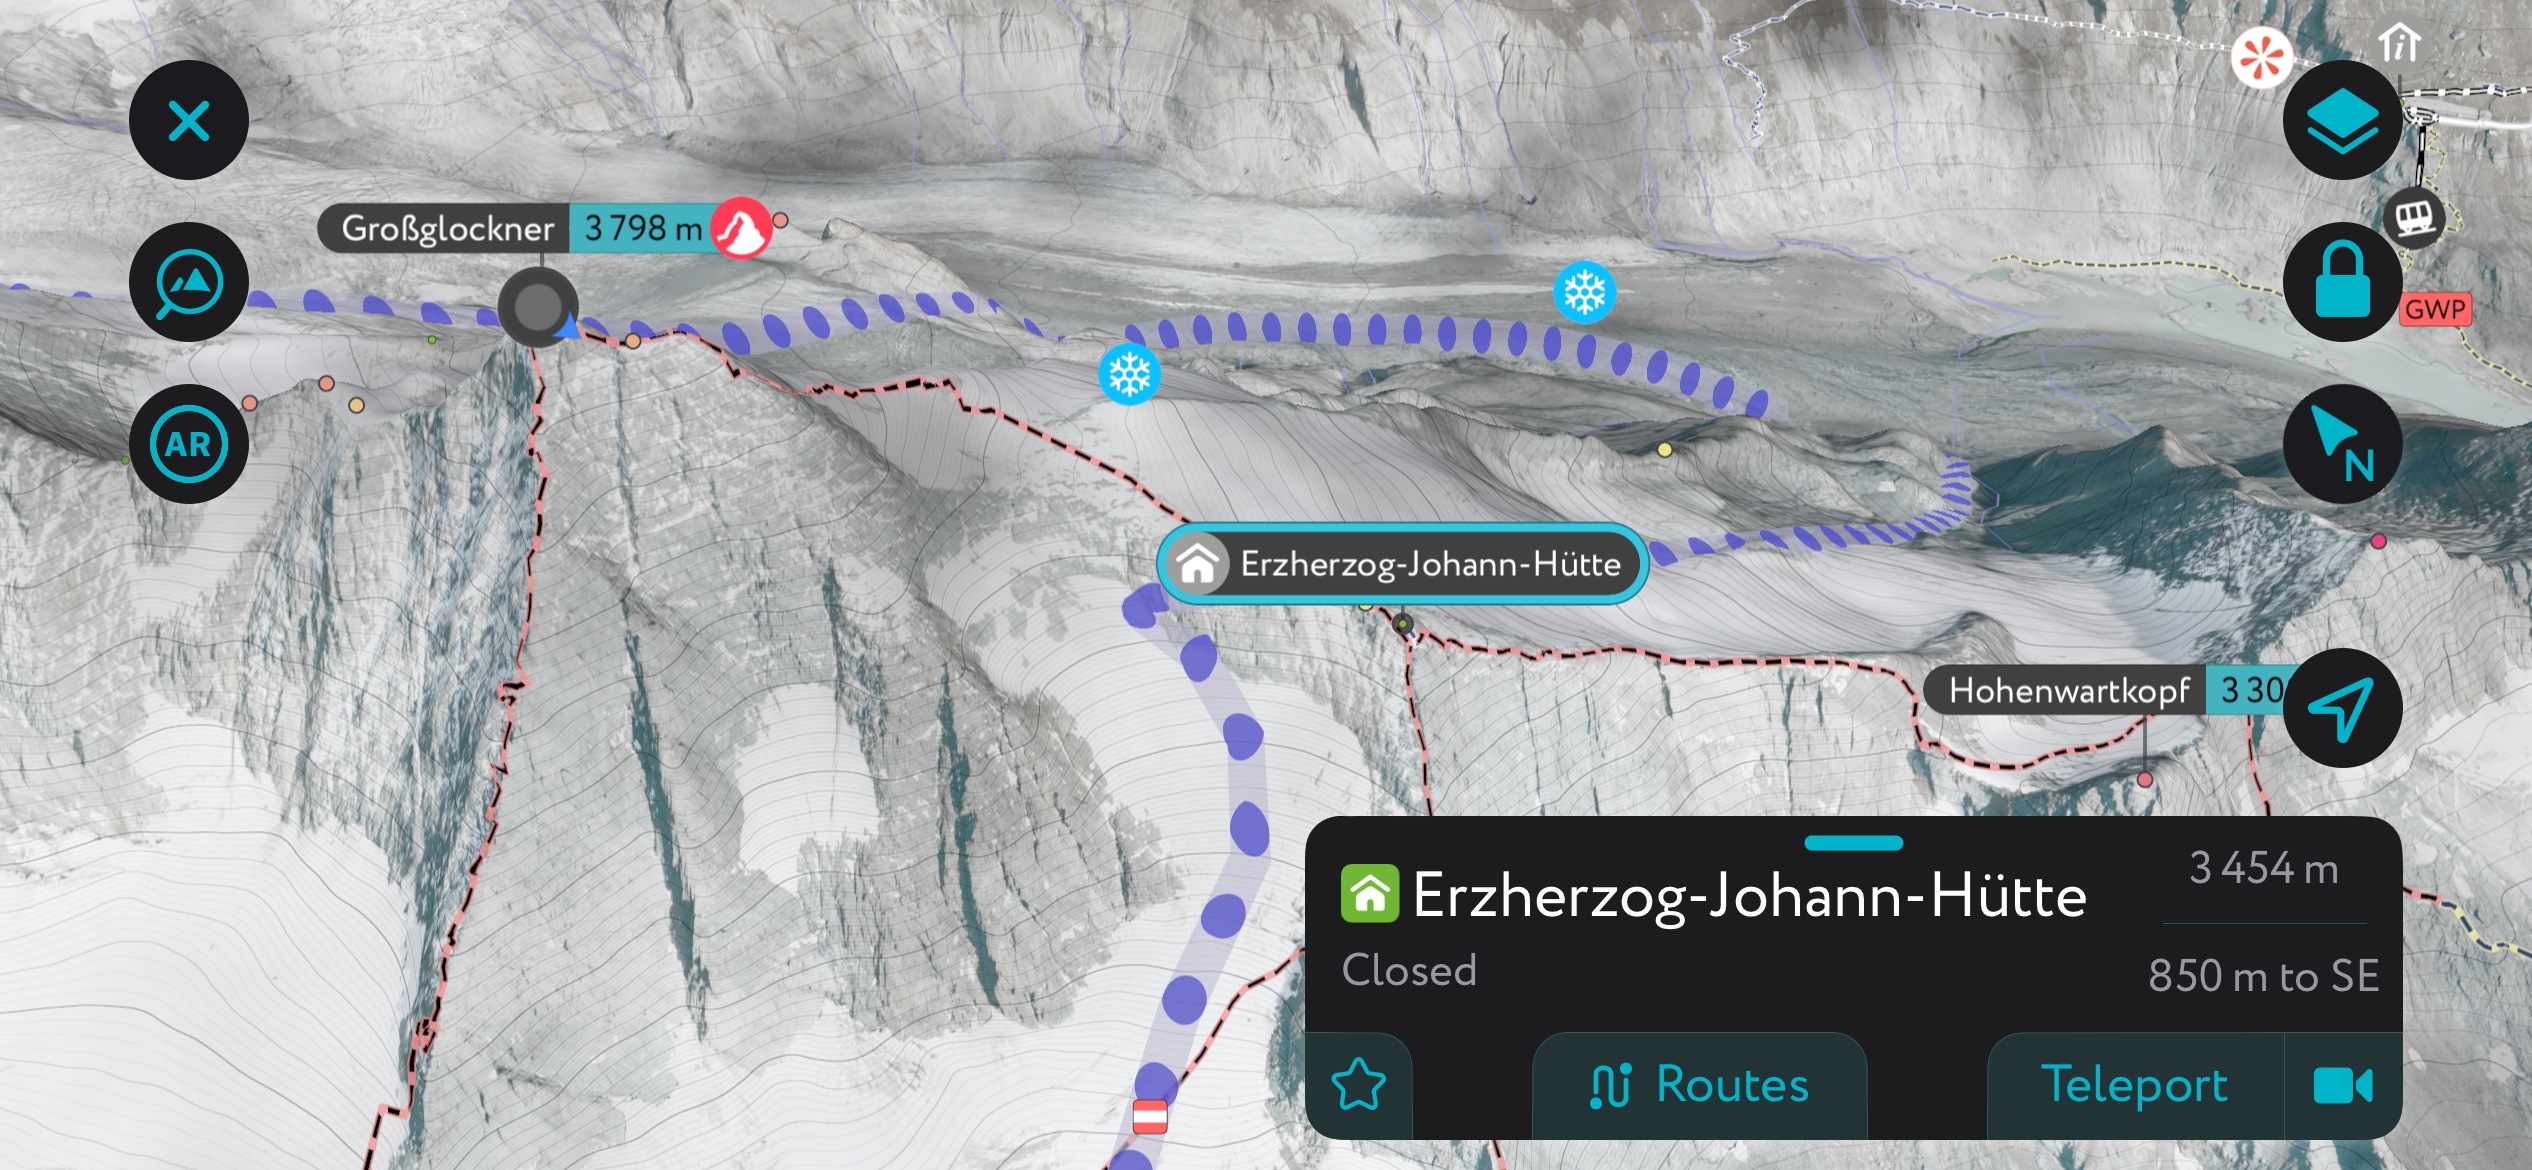 The PeakVisor App offers information on nearly all mountain huts in the Alps and beyond. Glockner Group